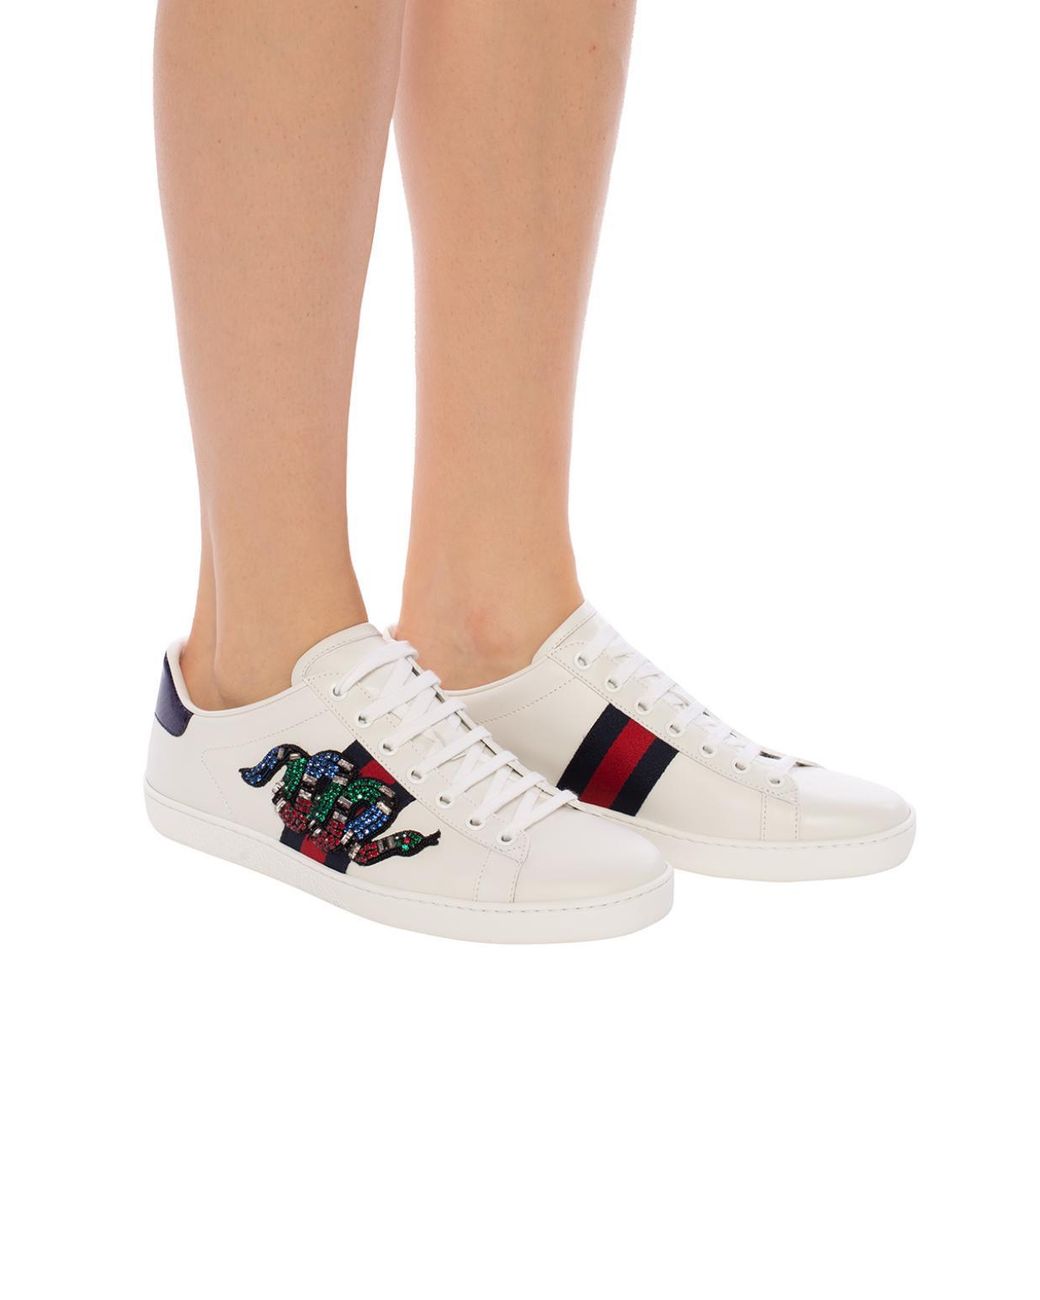 Gucci Snake Motif Sneakers in White | Lyst